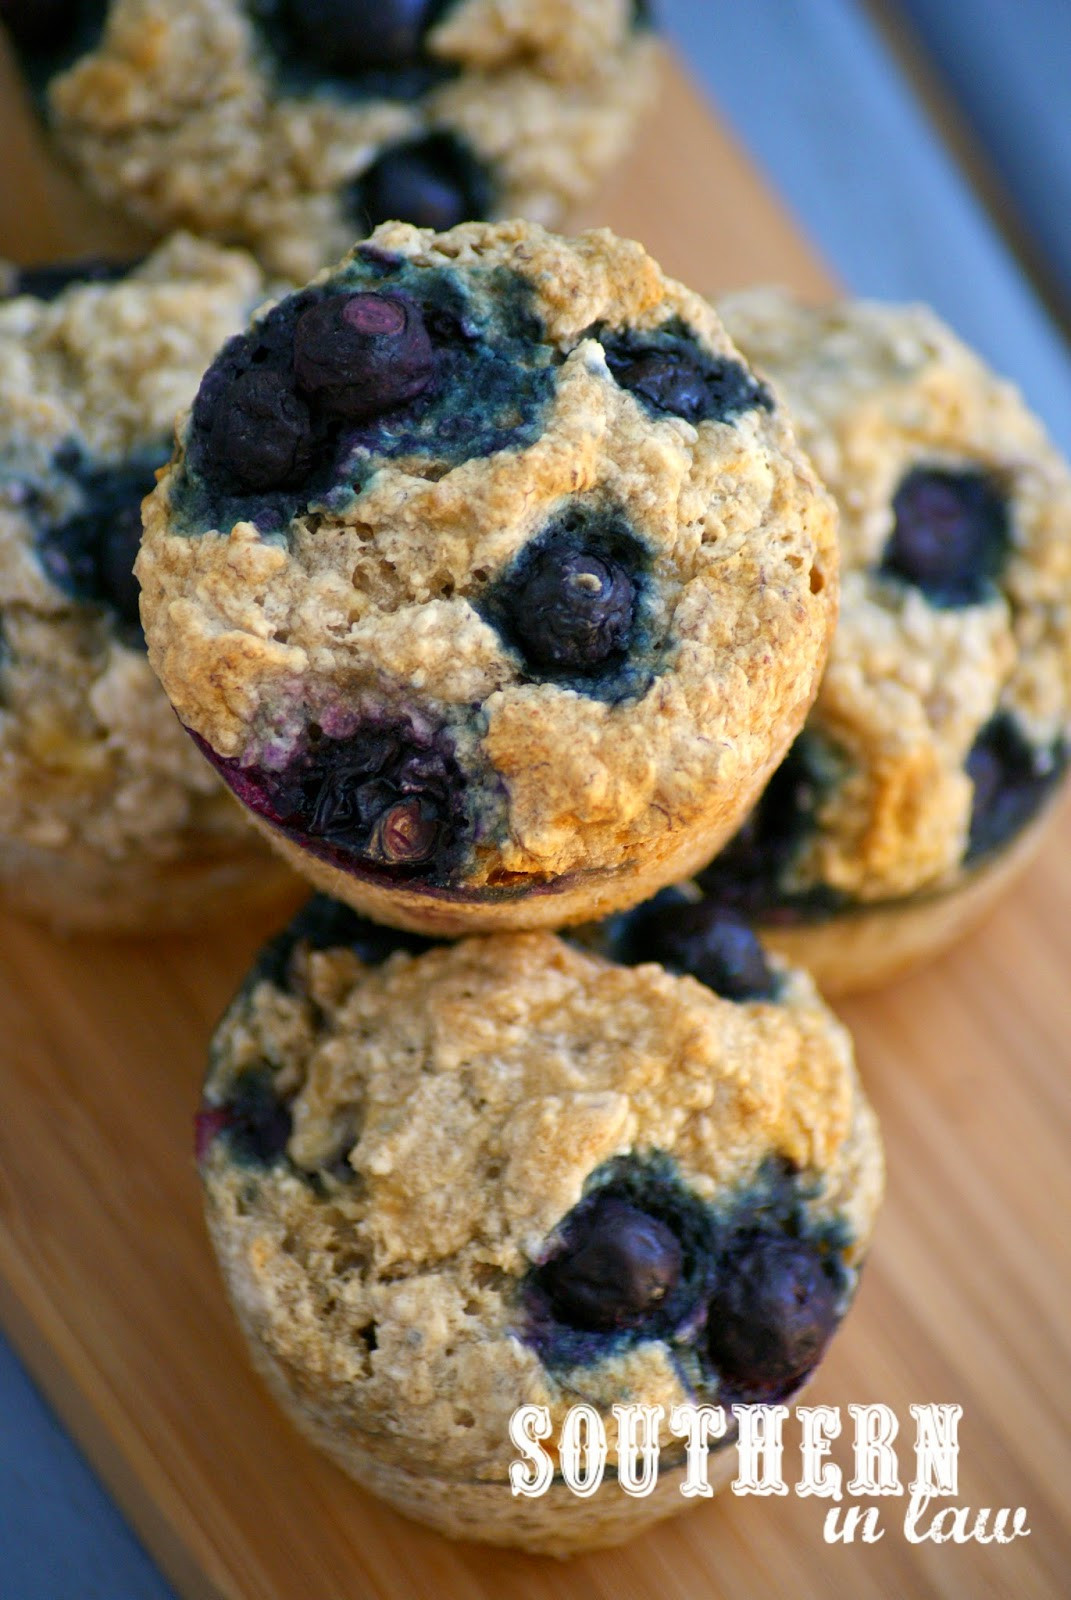 Healthy Vegan Muffin Recipes
 Southern In Law Recipe Healthy Vegan Blueberry and